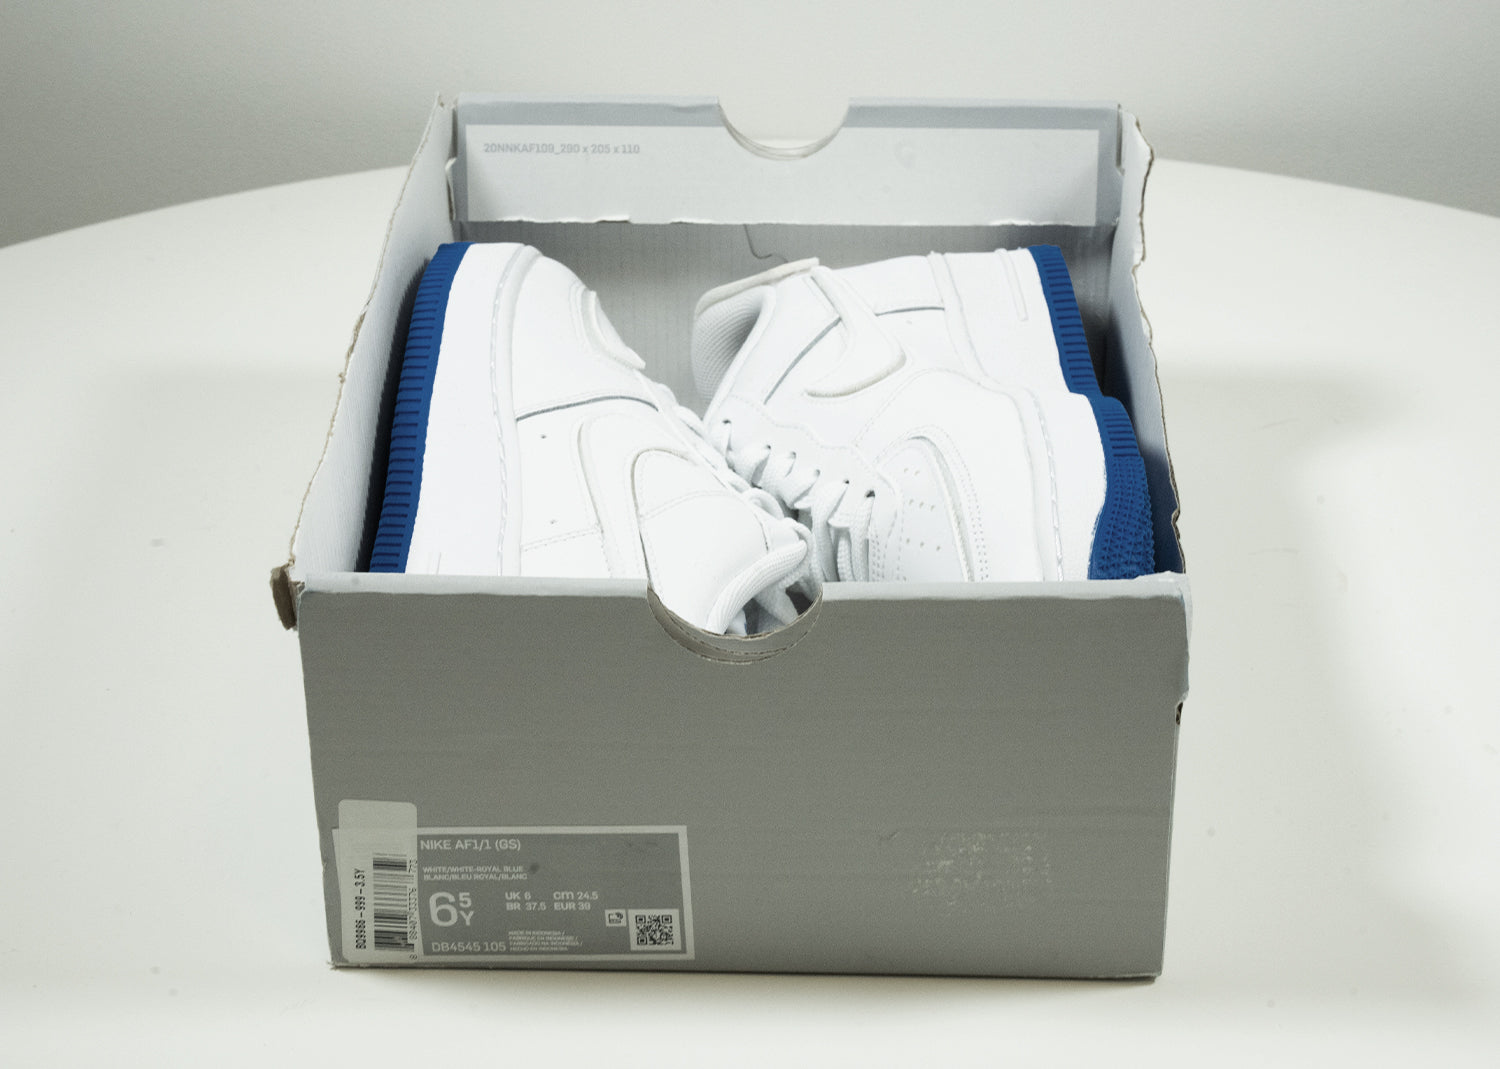 Second Chance - Shoes nike Air Force 1/1 White Royal Blue (GS) | NEW